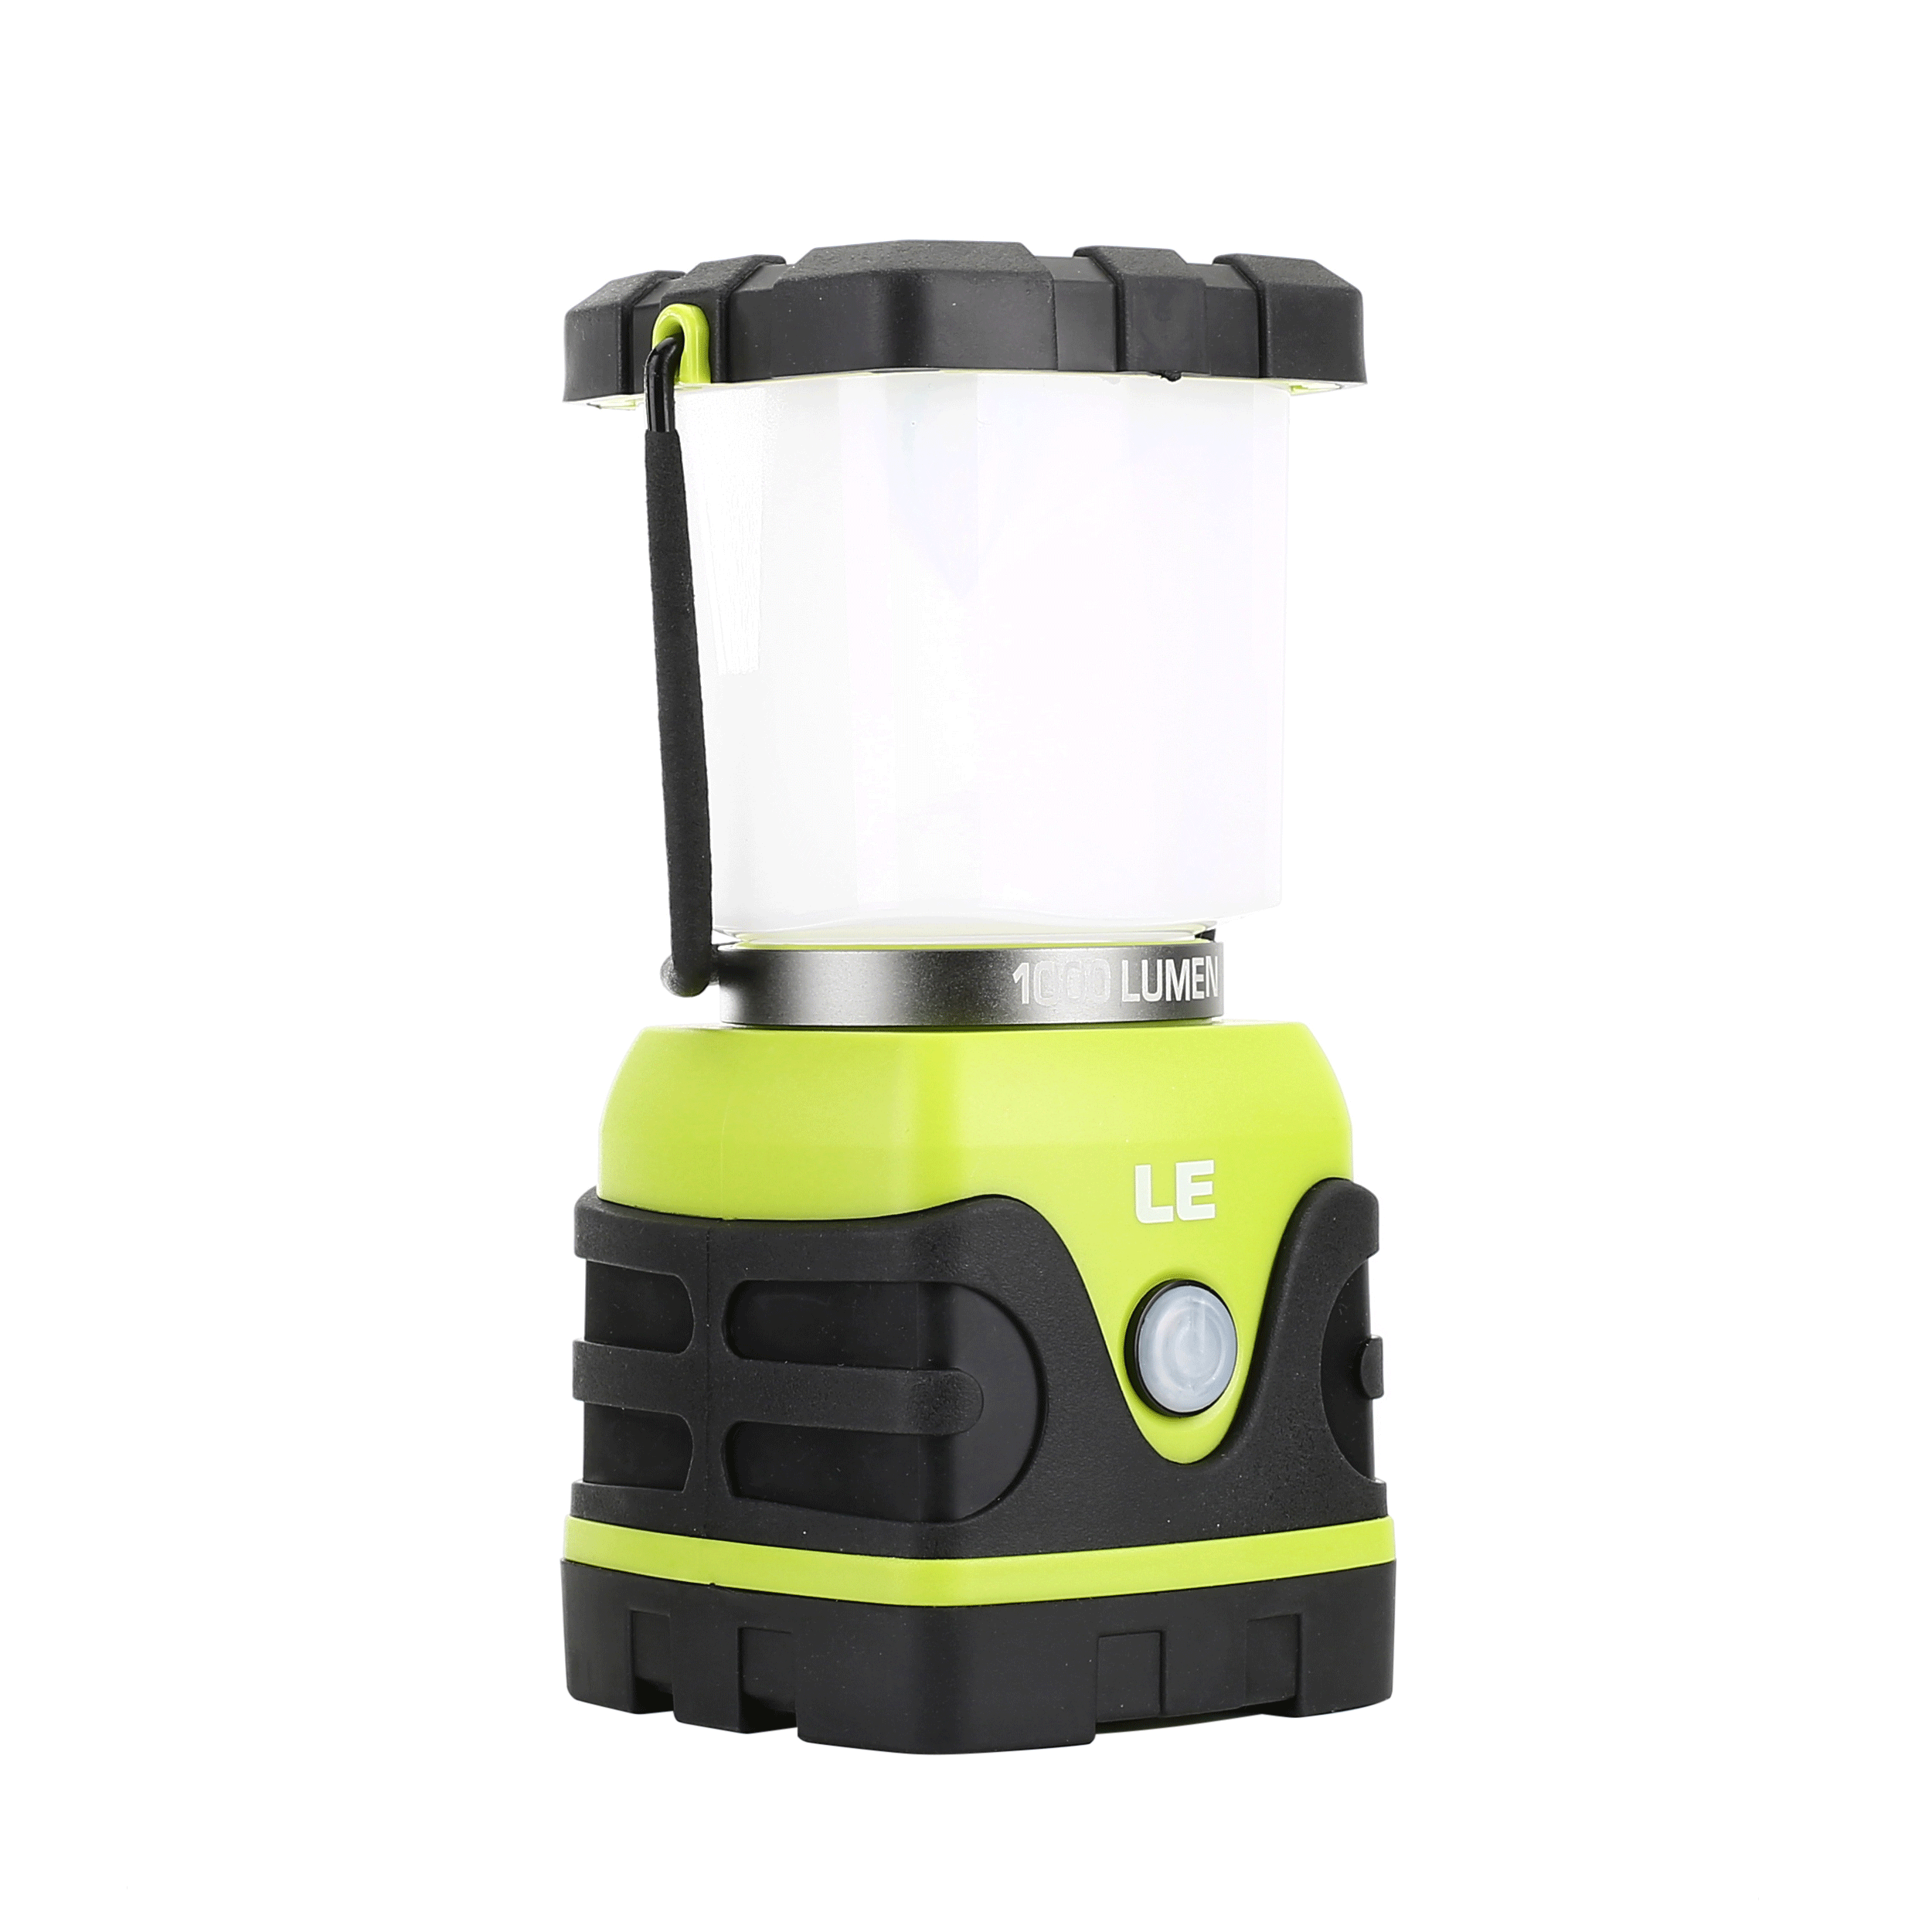 Lepro Camping Lantern, 1000 Lumen Camping Lights Battery Powered, Dimmable  Warm White and Daylight Modes, Battery Lantern for Power Cuts, Emergency  Lighting, Suit for Hiking, Fishing, Tents, etc 